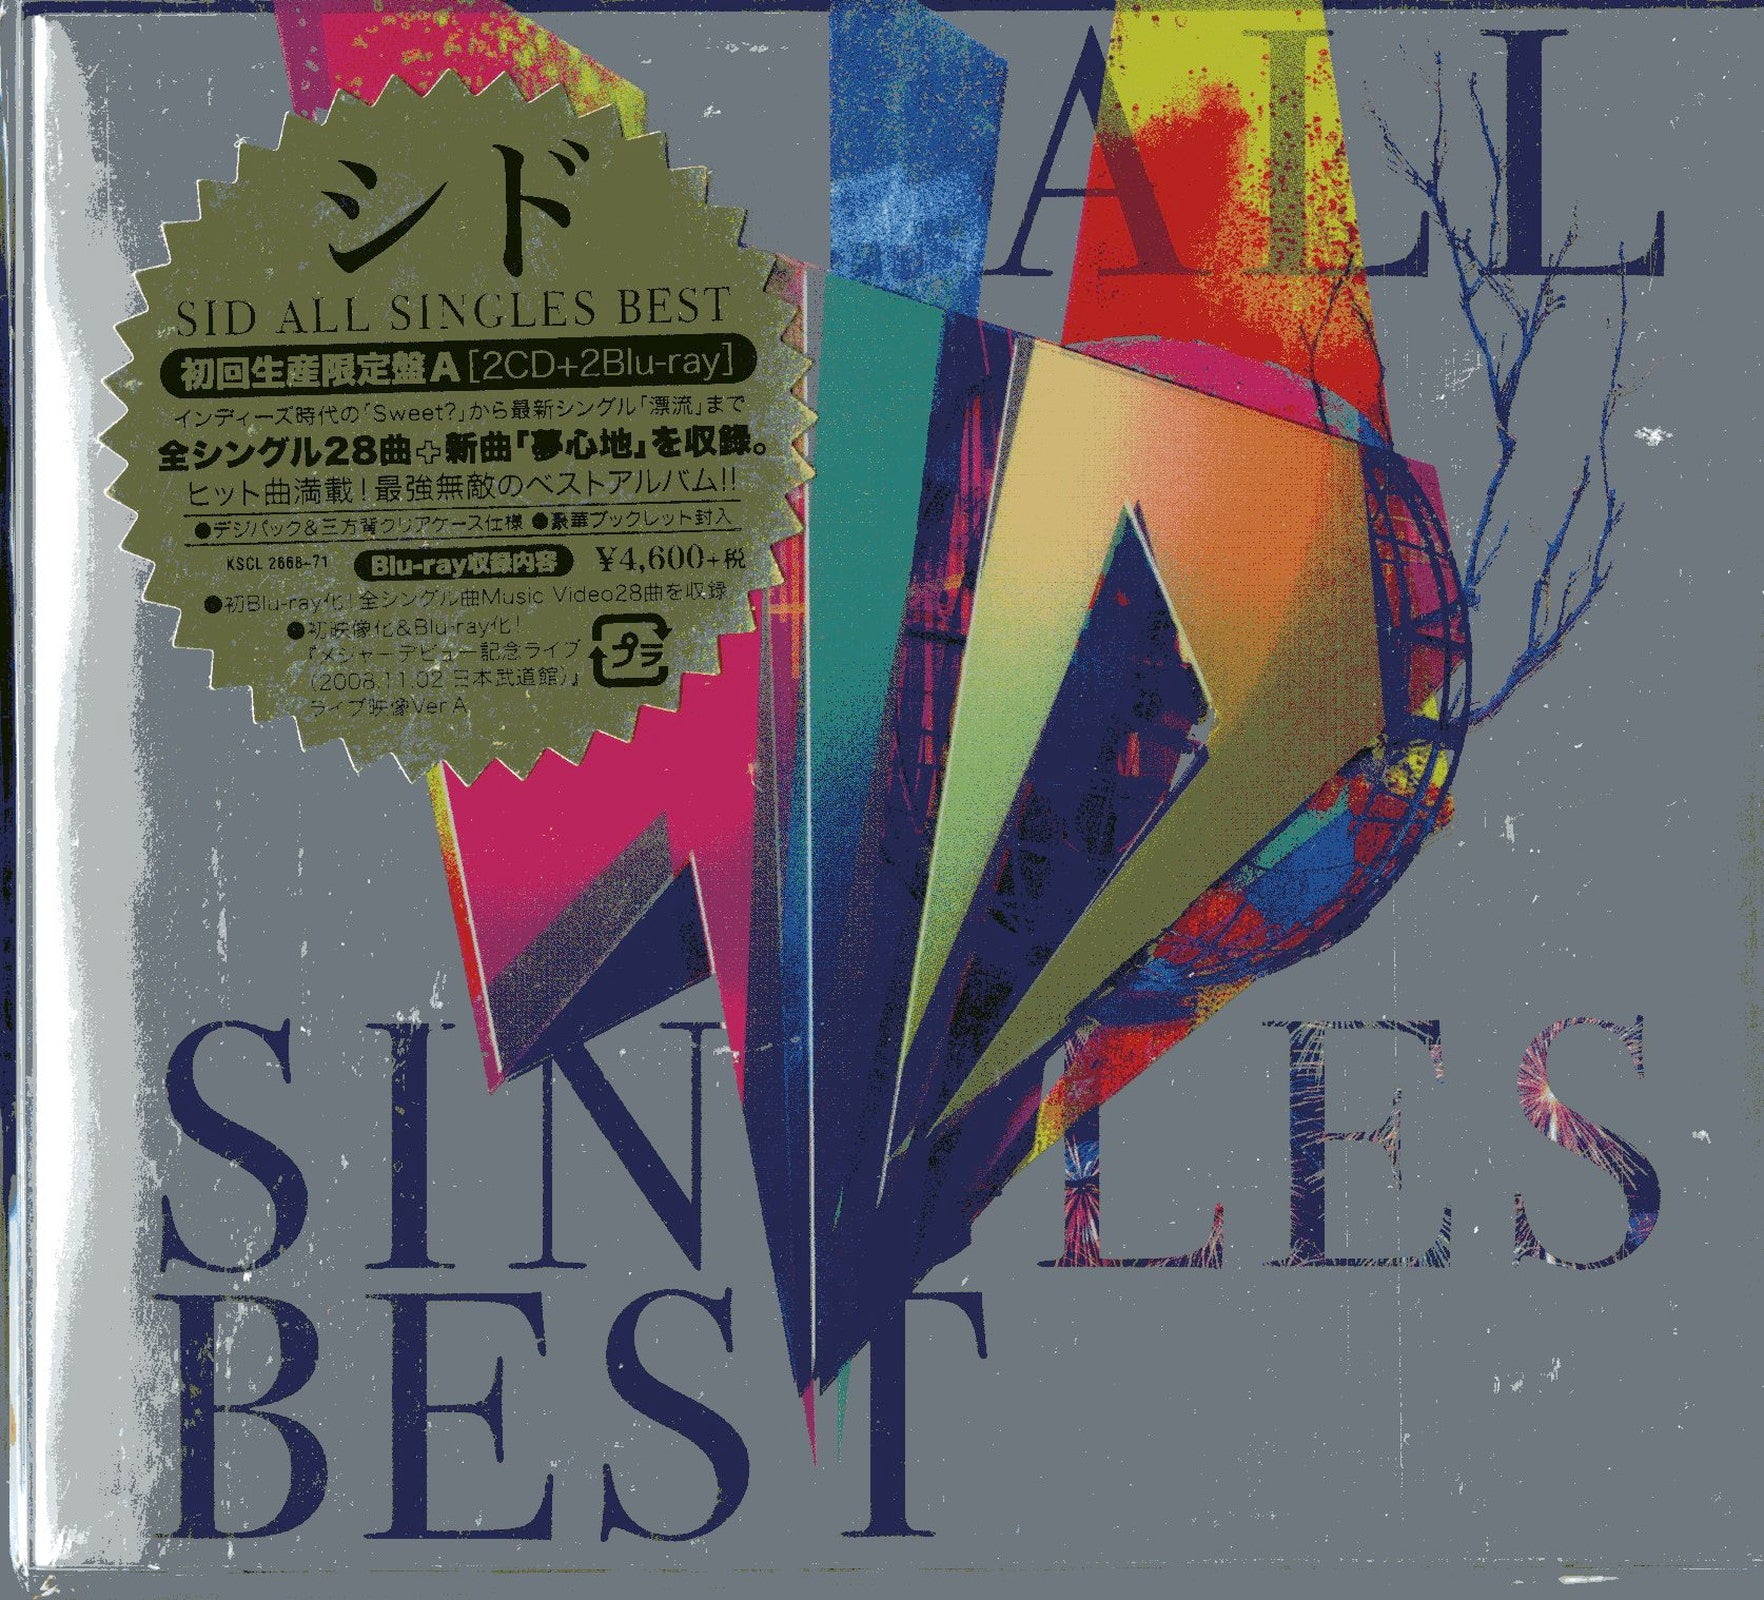 Sid - Sid All Singles Best (Type-A) - Japan 3 CD+Blu-ray Limited